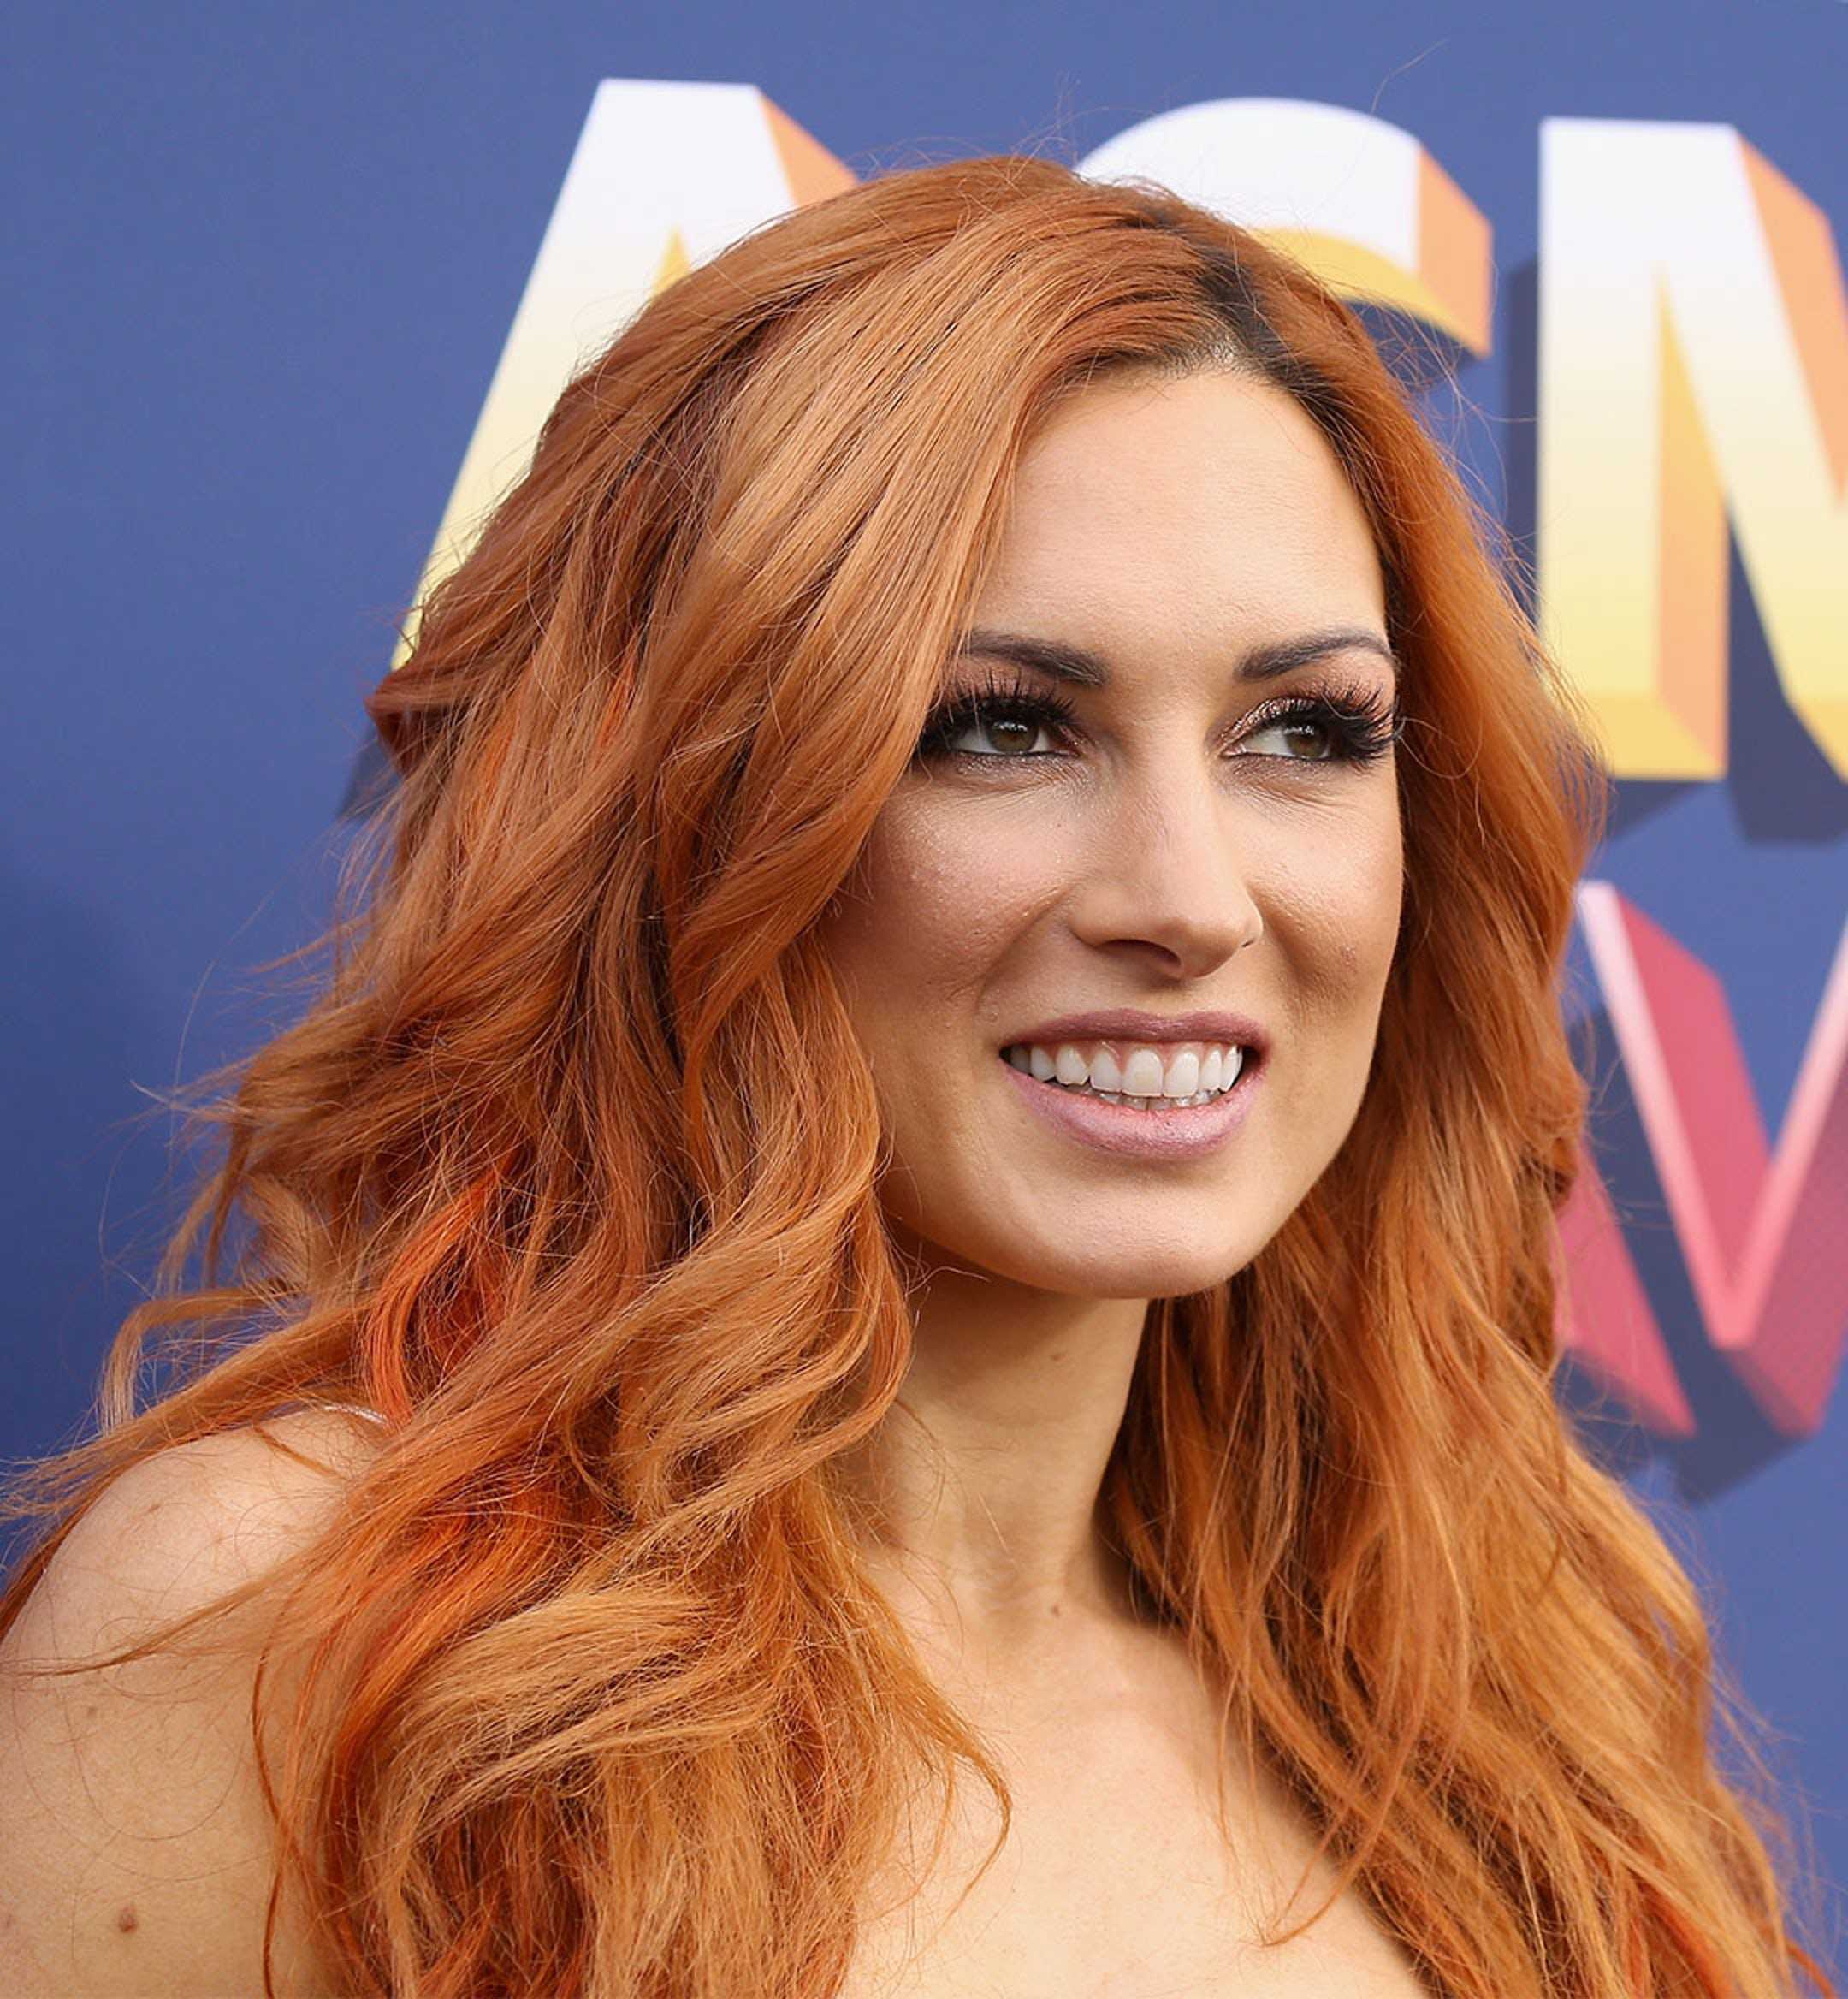 70+ Hot And Sexy Pictures of Becky Lynch – WWE Diva Will Sizzle You Up 47